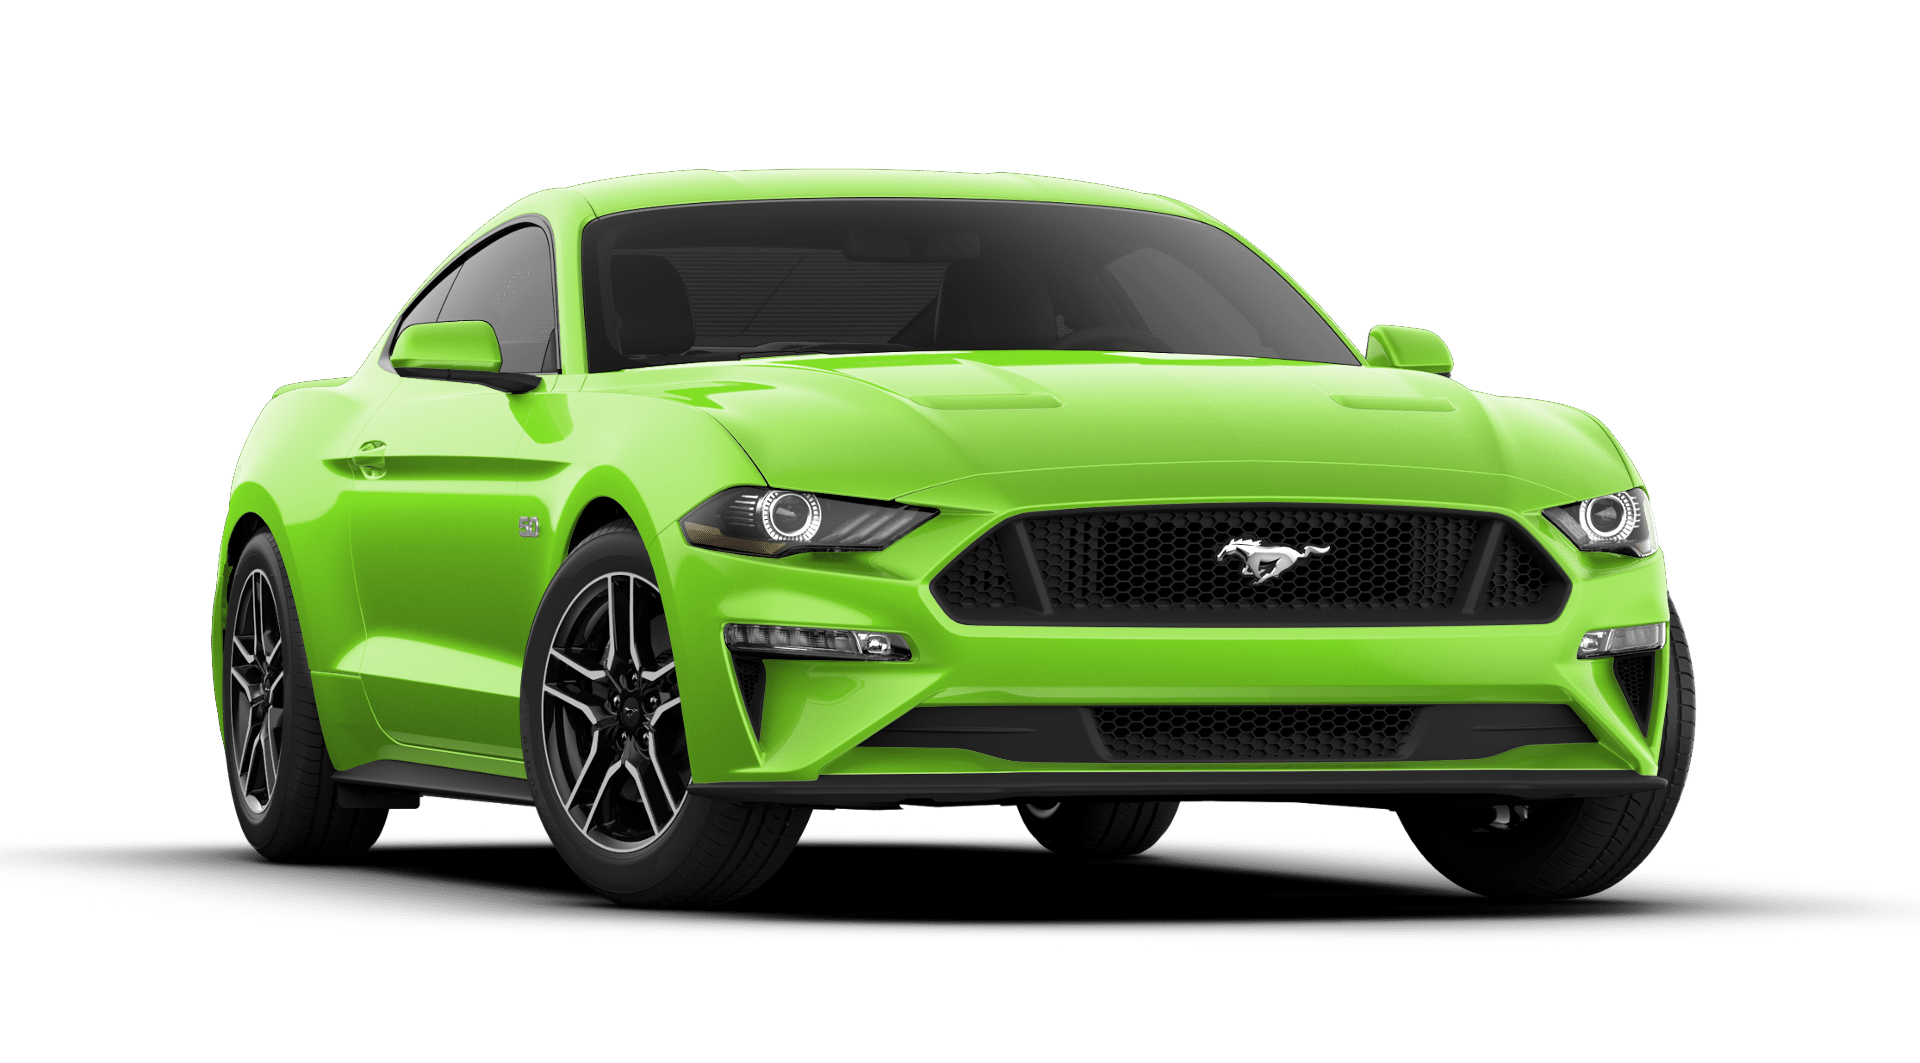 You Can Buy a 700-HP 2020 Ford Mustang GT for $40,000